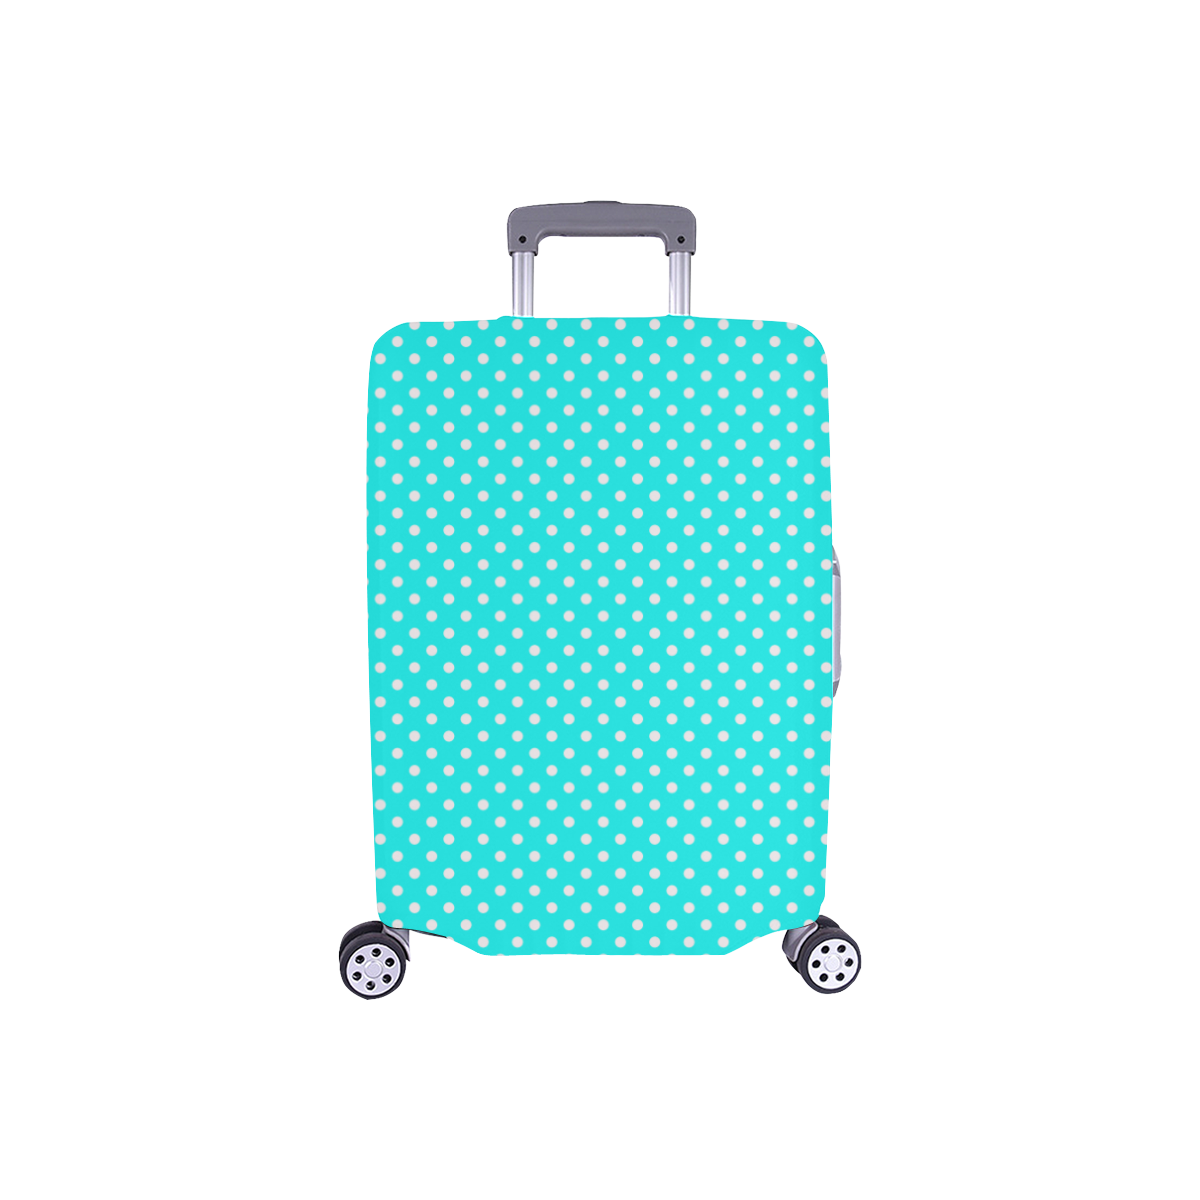 Baby blue polka dots Luggage Cover/Small 18"-21"